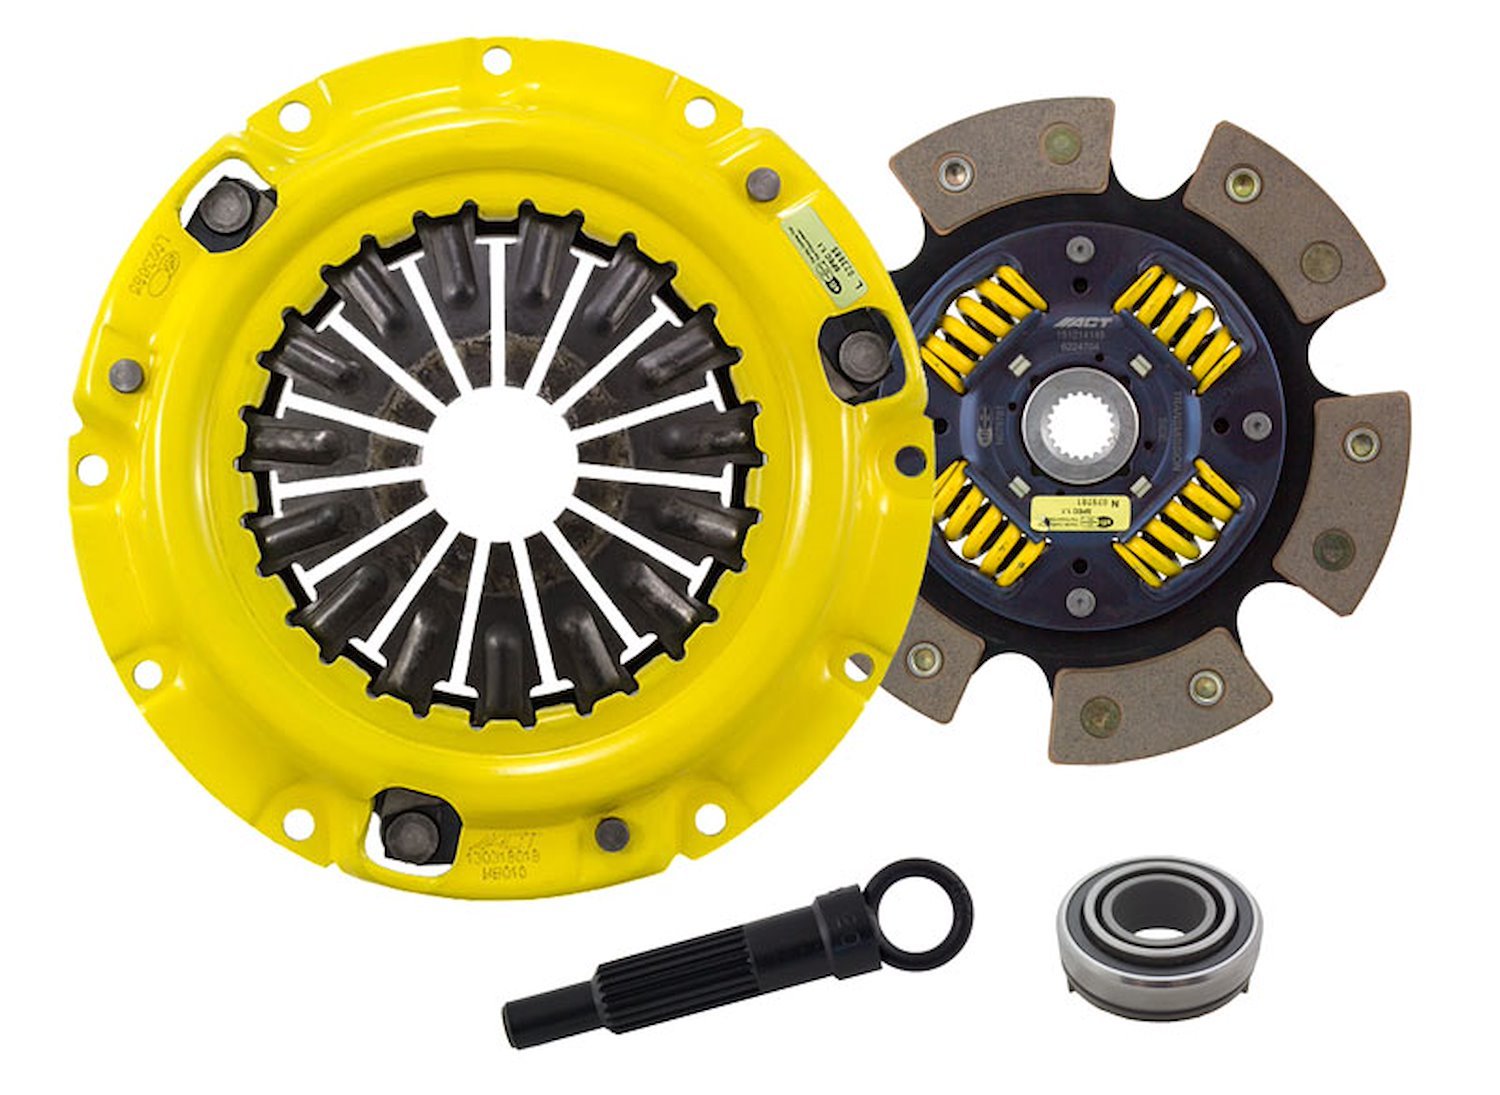 HD/Race Sprung 6-Pad Transmission Clutch Kit Fits Select Chrysler/Dodge/Eagle/Mitsubishi/Plymouth